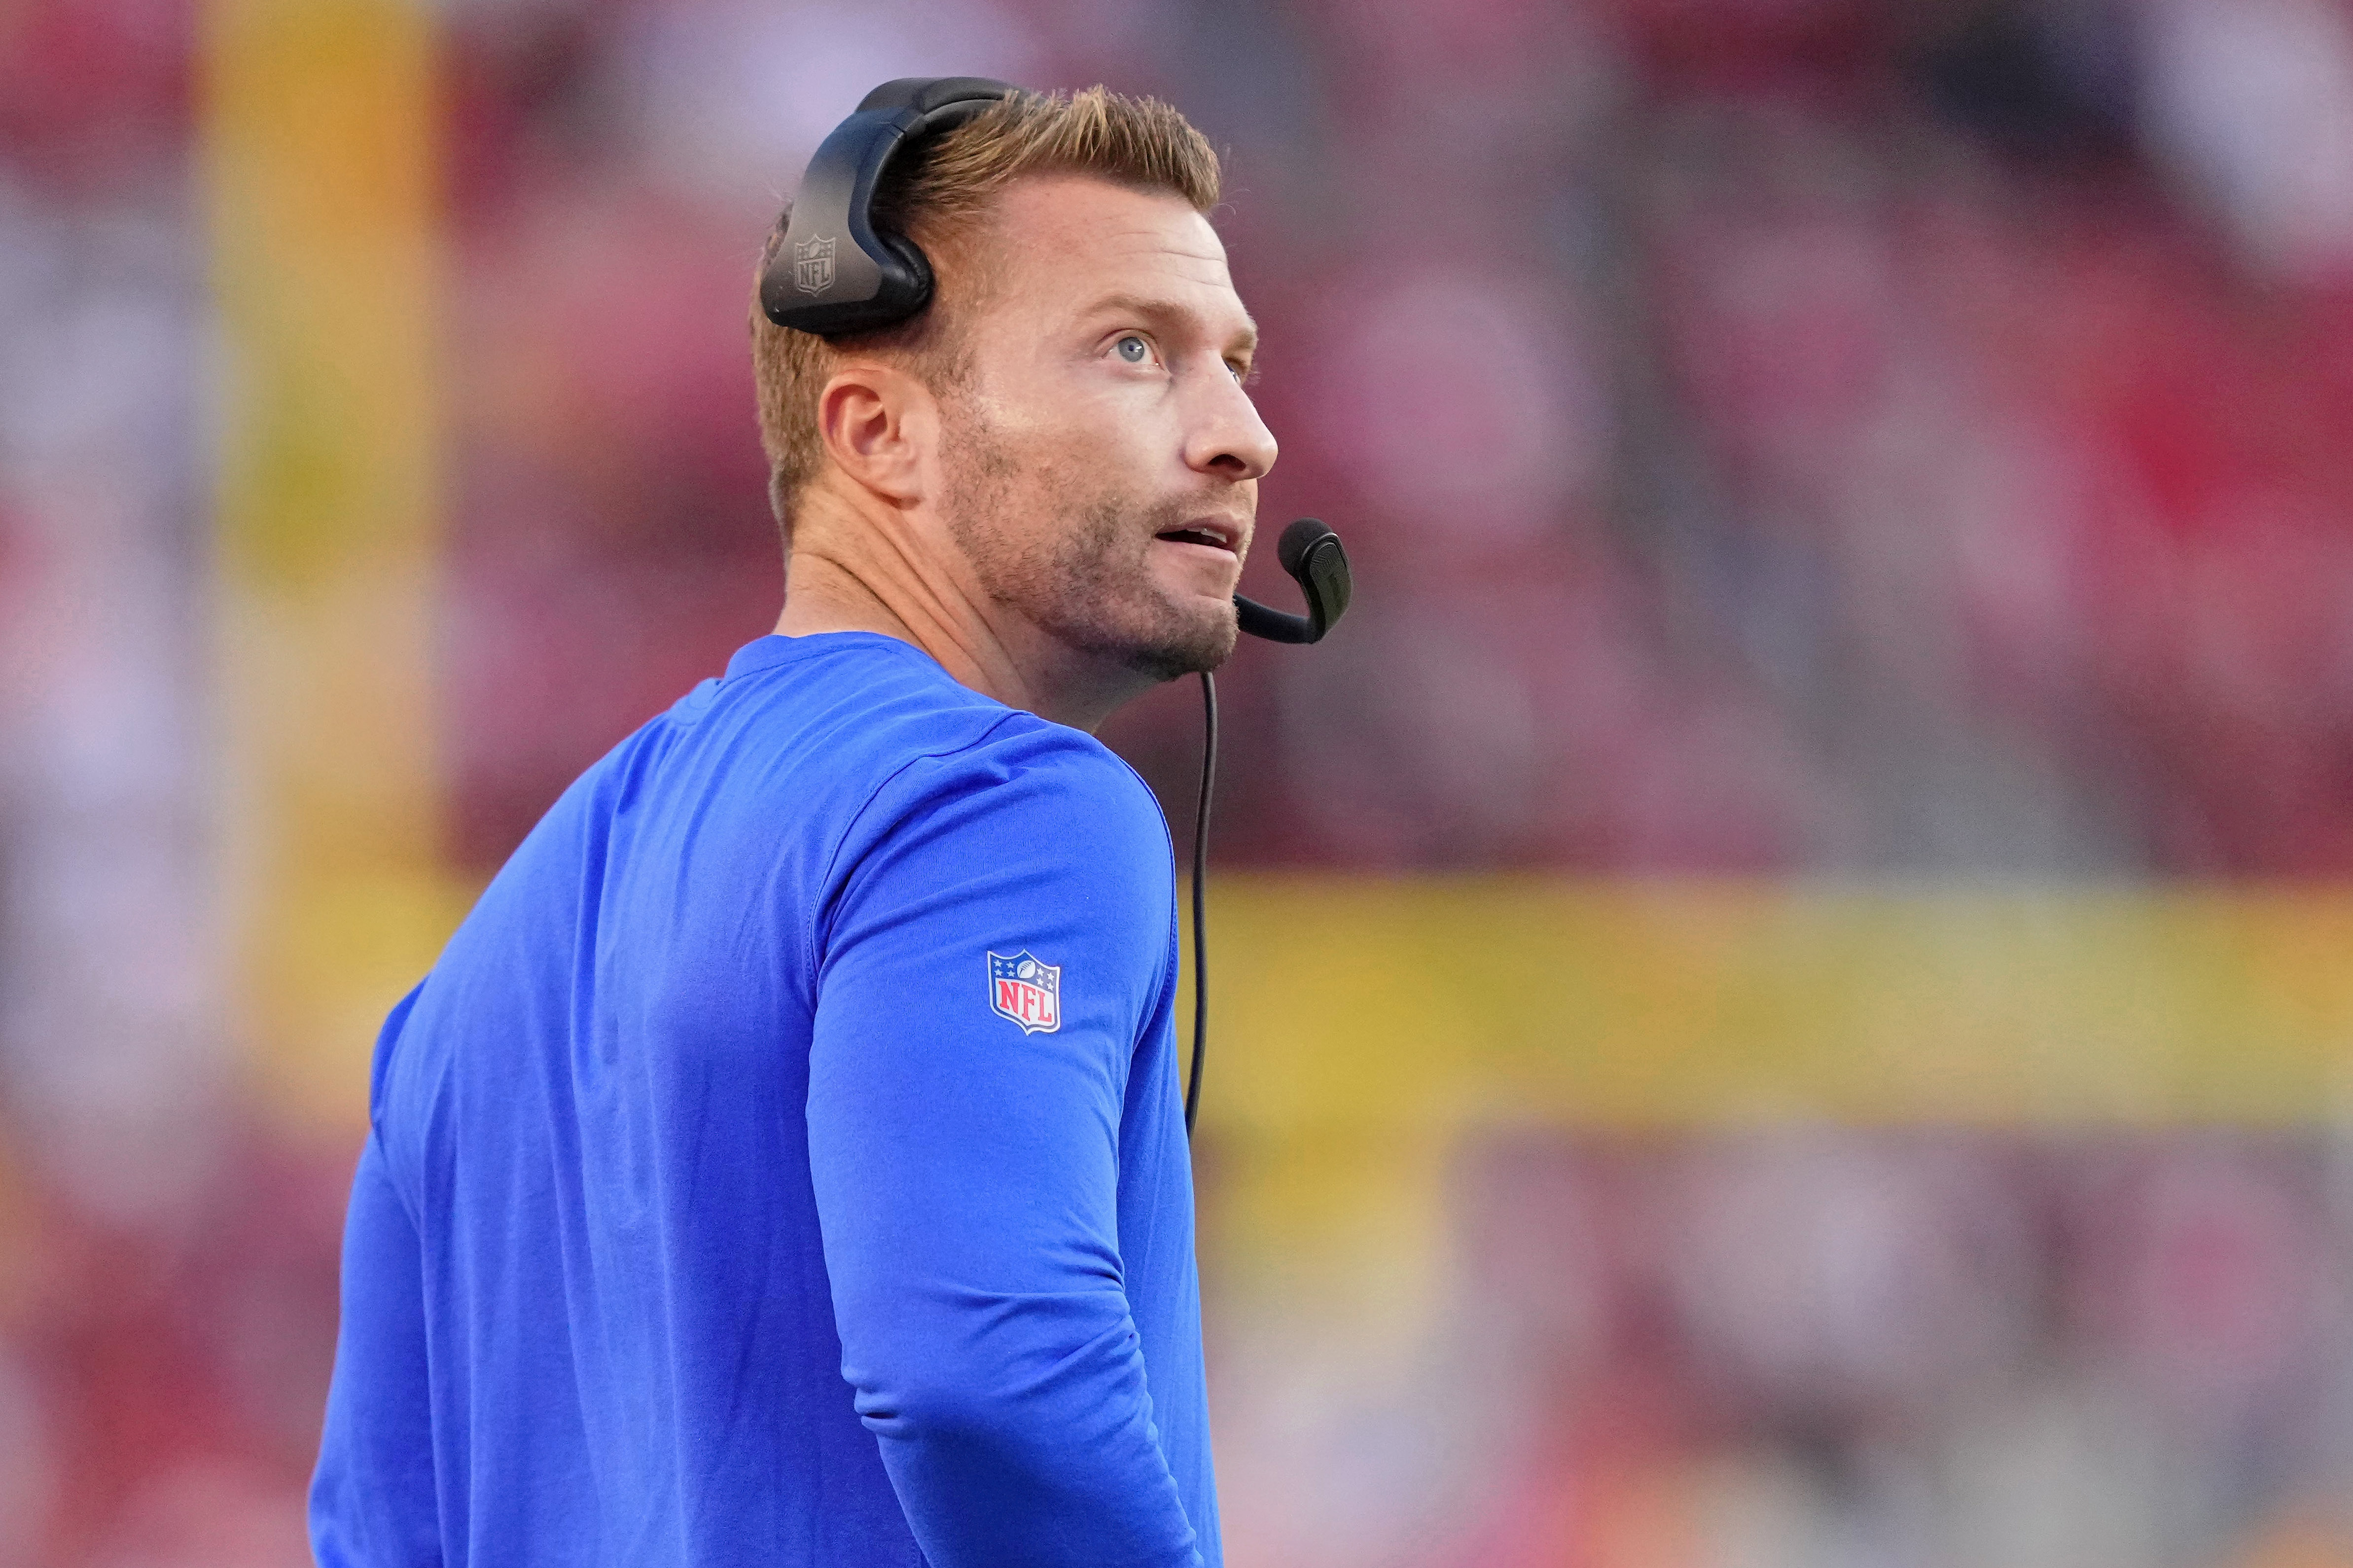 Rams Coach Sean McVay: ‘The Story Isn’t Written Yet’ on Rams Early Offensive Struggles